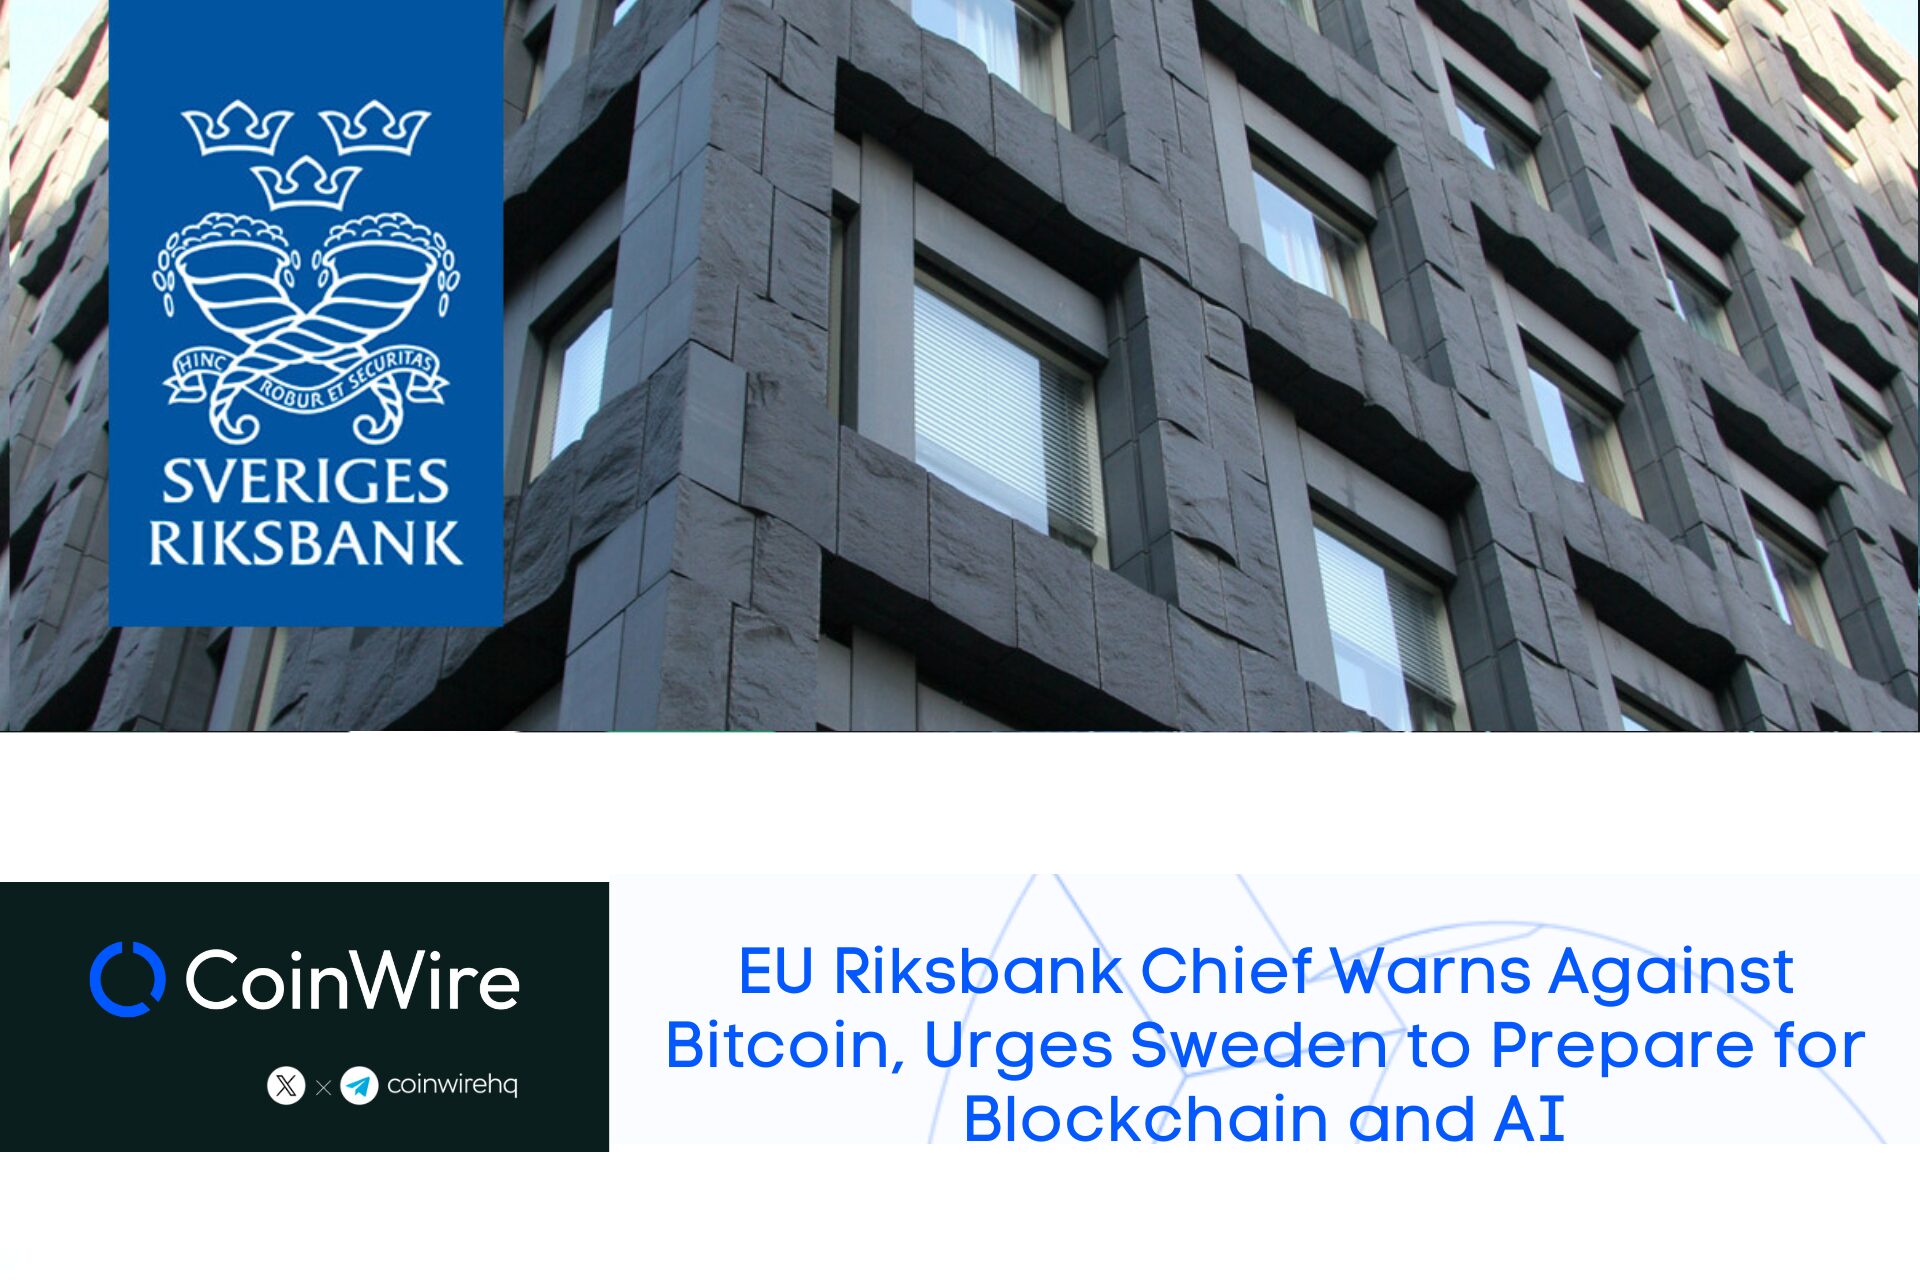 Eu Riksbank Chief Warns Against Bitcoin, Urges Sweden To Prepare For Blockchain And Ai